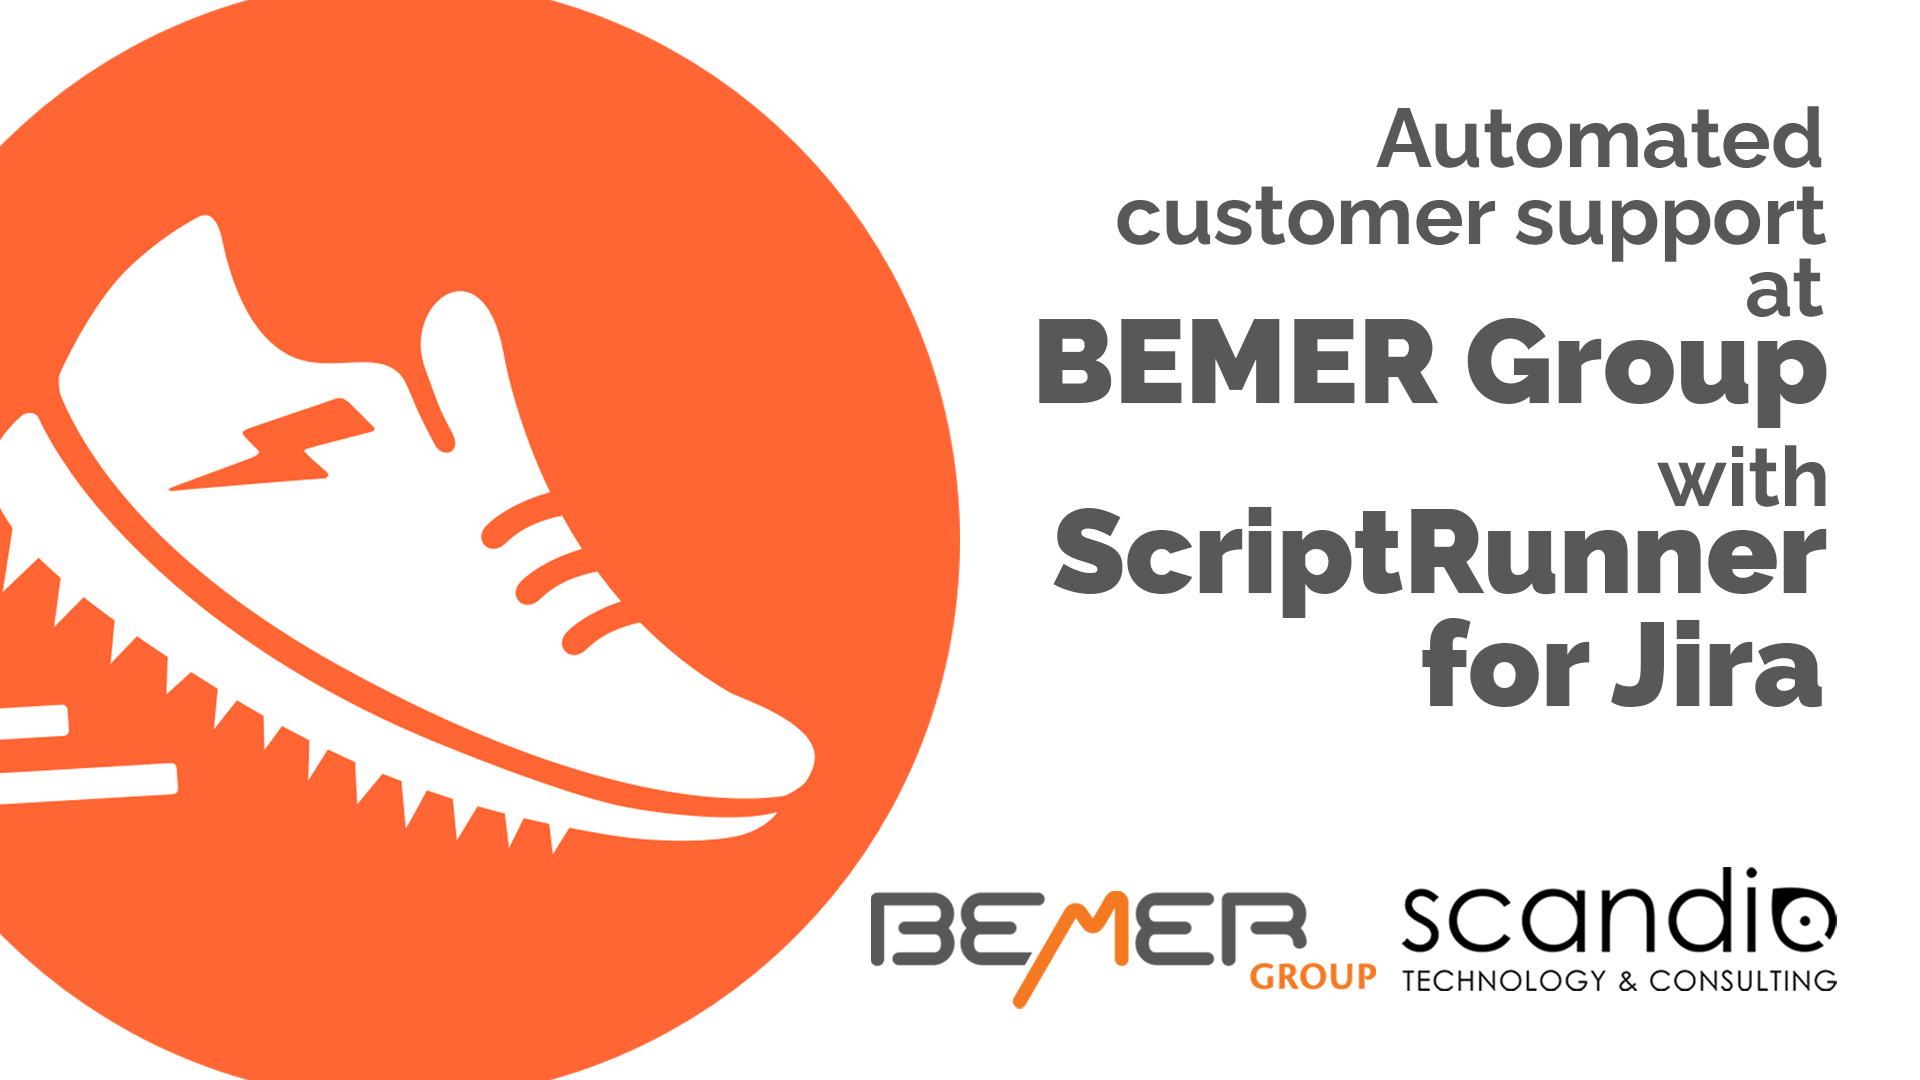 Automated customer support at BEMER Group with ScriptRunner for Jira